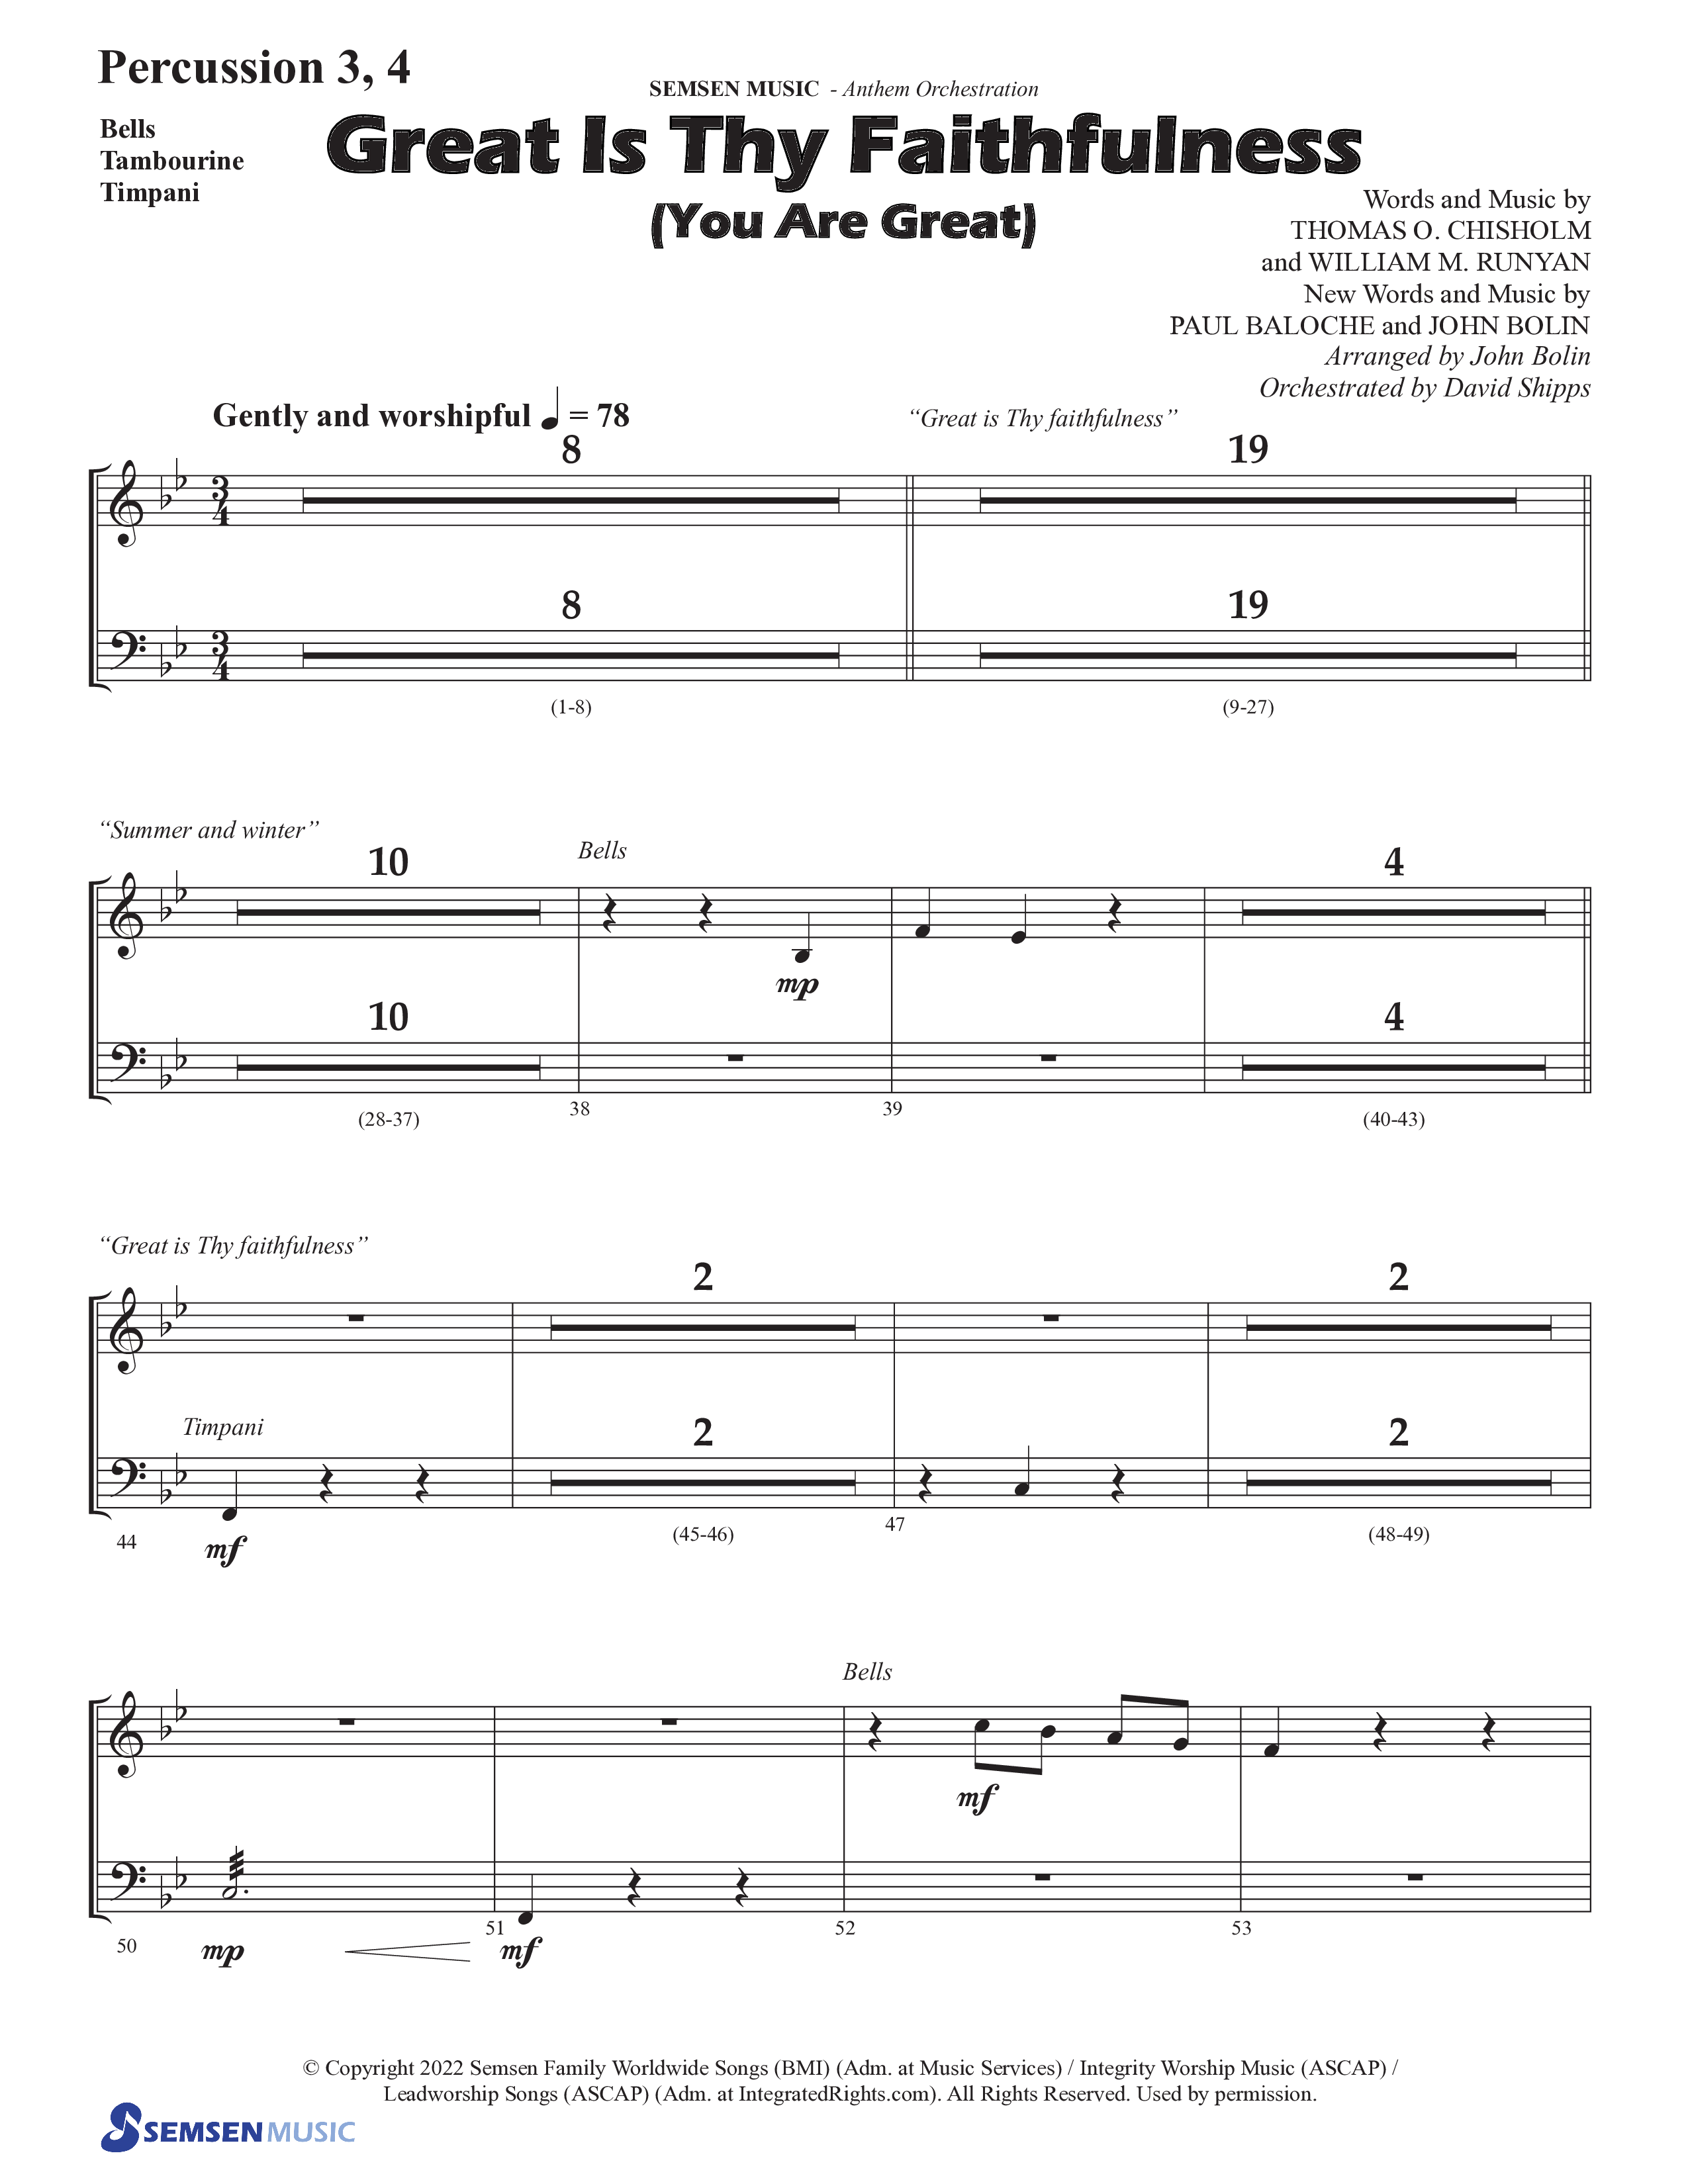 Great Is Thy Faithfulness (You Are Great) (Choral Anthem SATB) Percussion (Semsen Music / Arr. John Bolin / Orch. David Shipps)